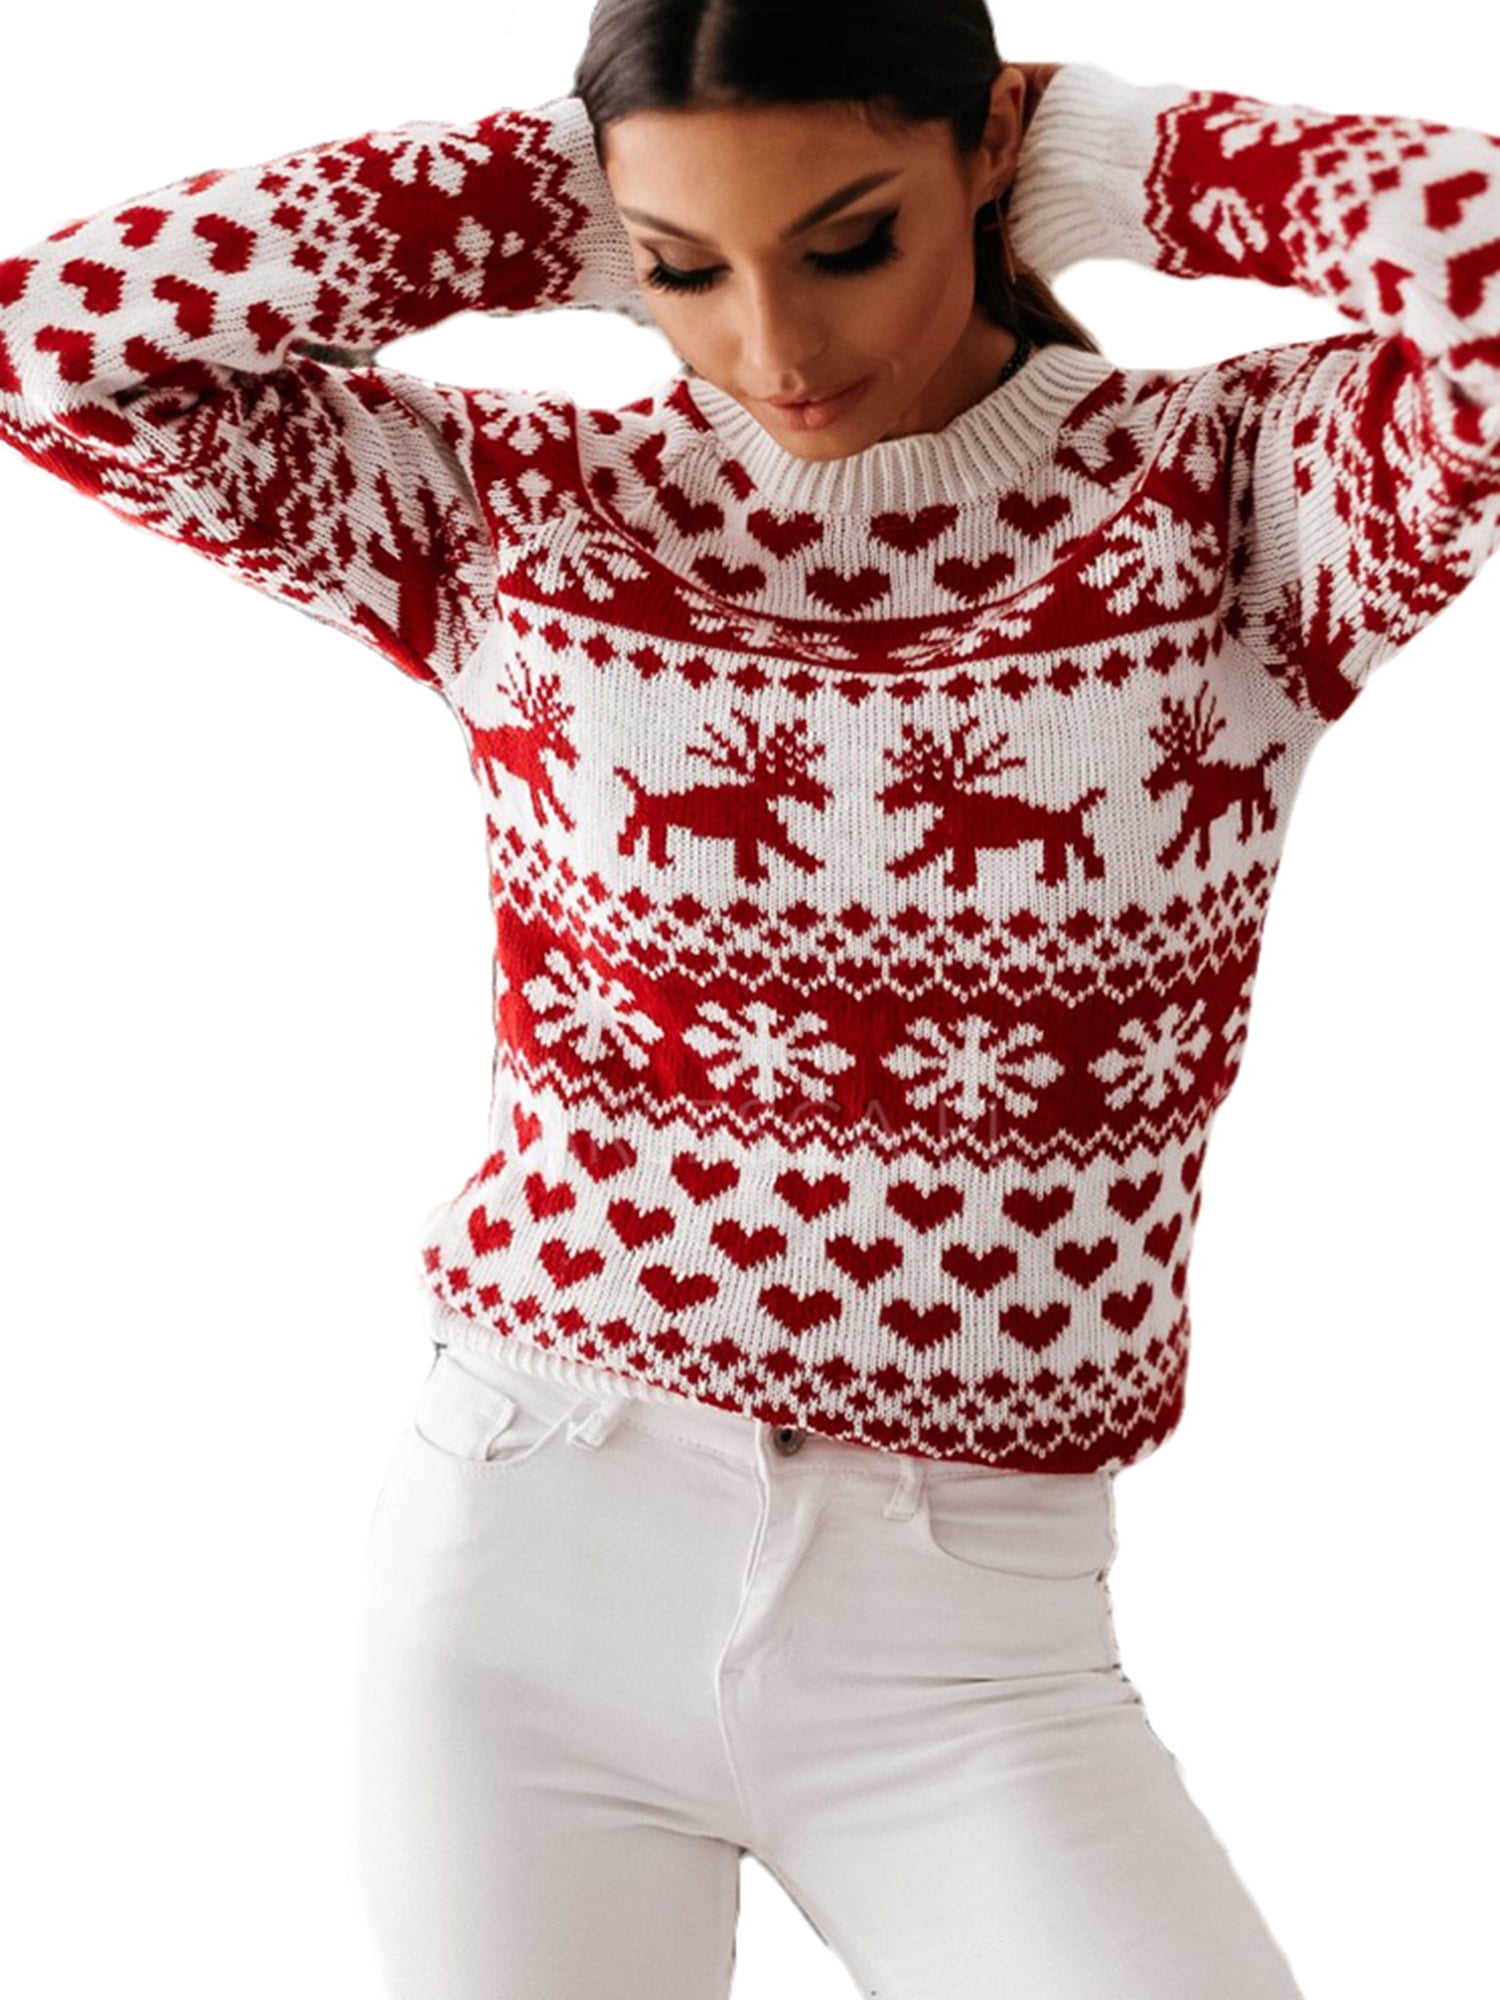 Women Ugly Christmas Sweater Vintage Reindeer Snowflakes Cute Xmas Knit Sweater Pullover Funny Long Sleeve Blouse 